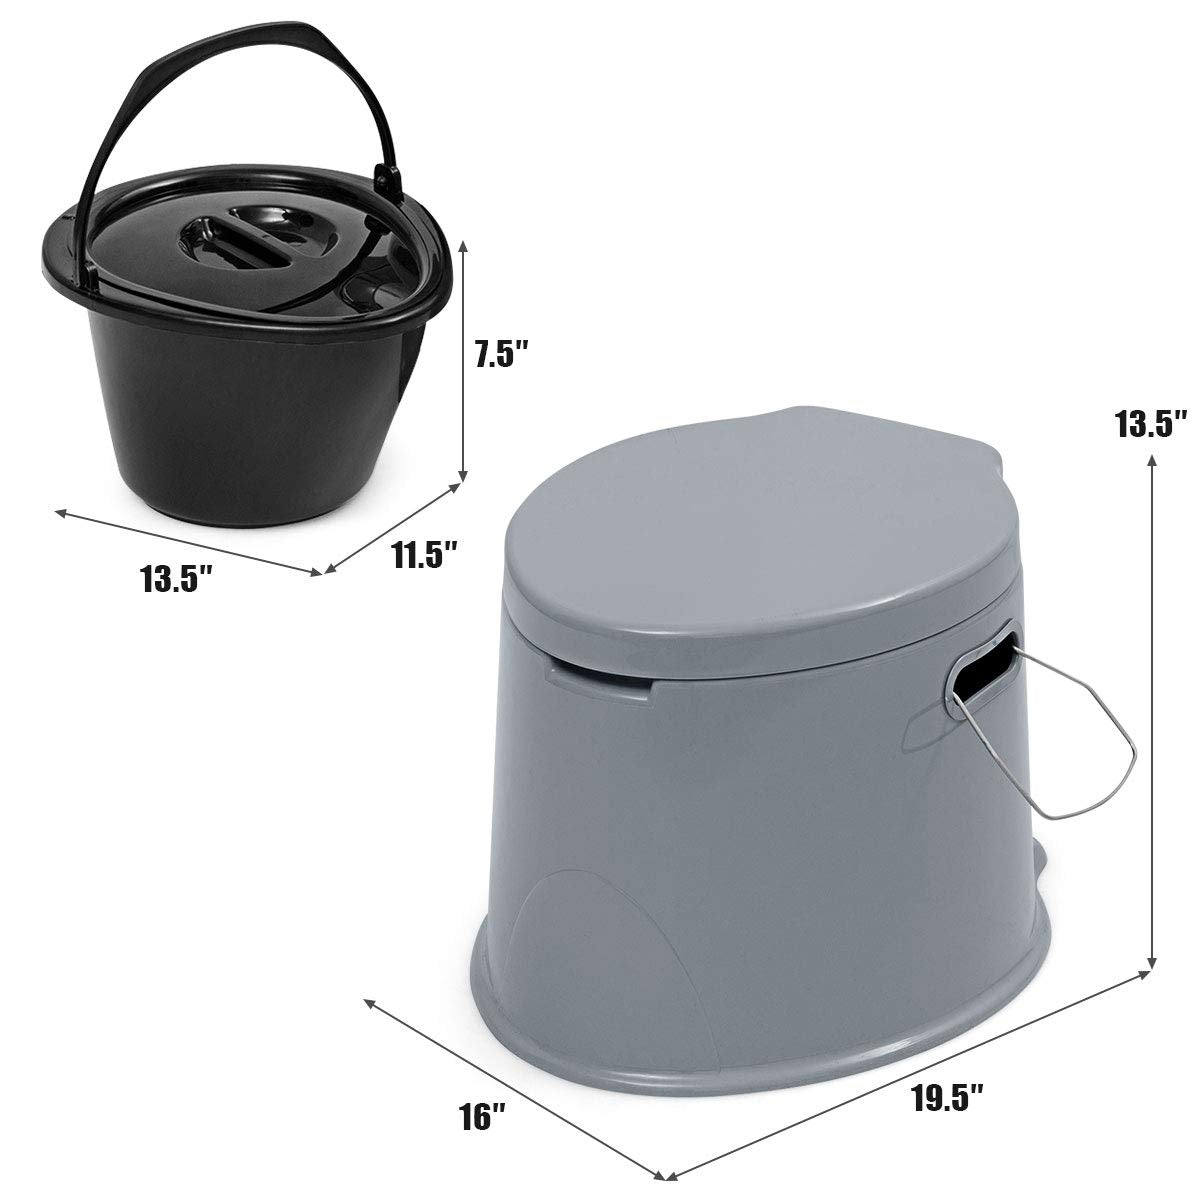 Portable Travel Toilet with Detachable Inner Bucket and Removable Toilet